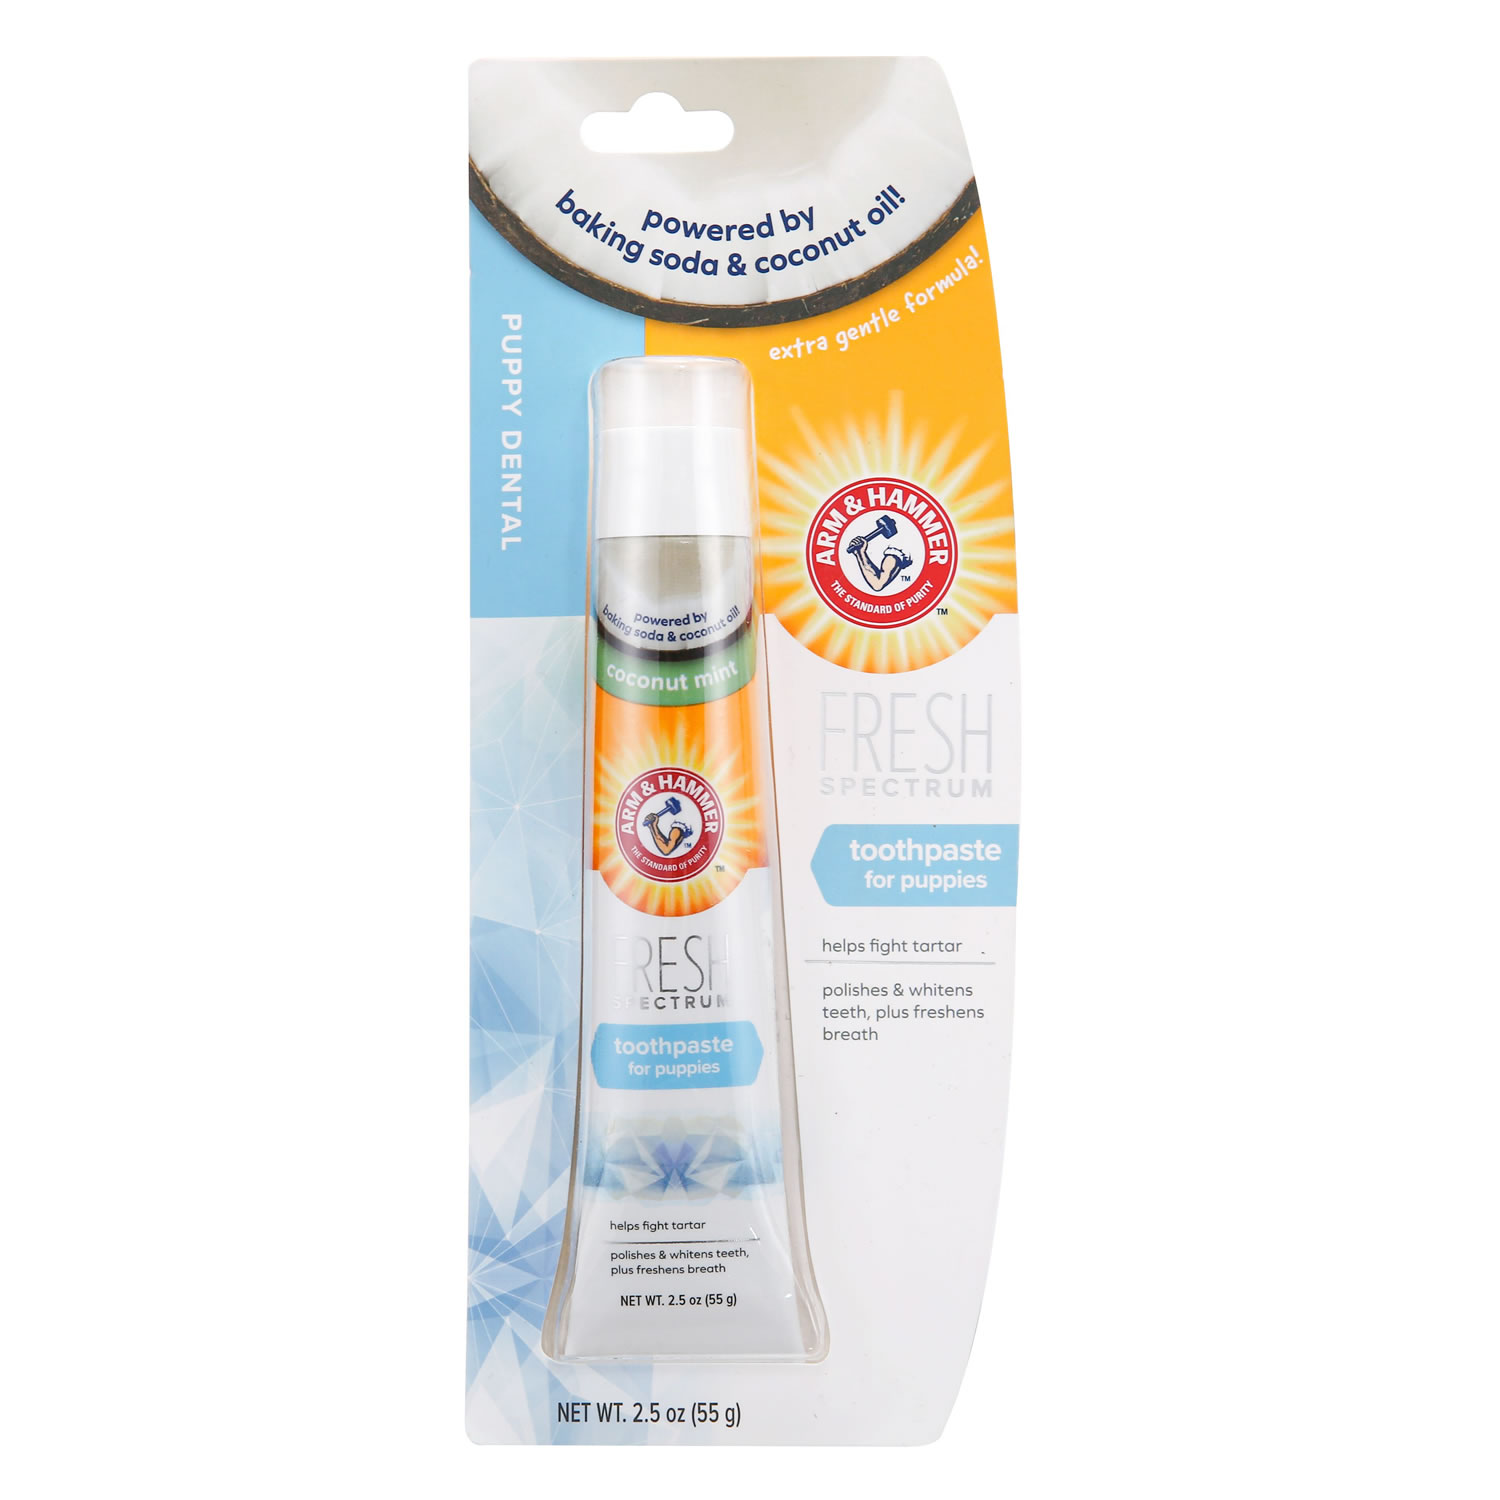 ARM & HAMMER FRESH COCONUT MINT TOOTHPASTE FOR PUPPIES PUPPY PUPPIES